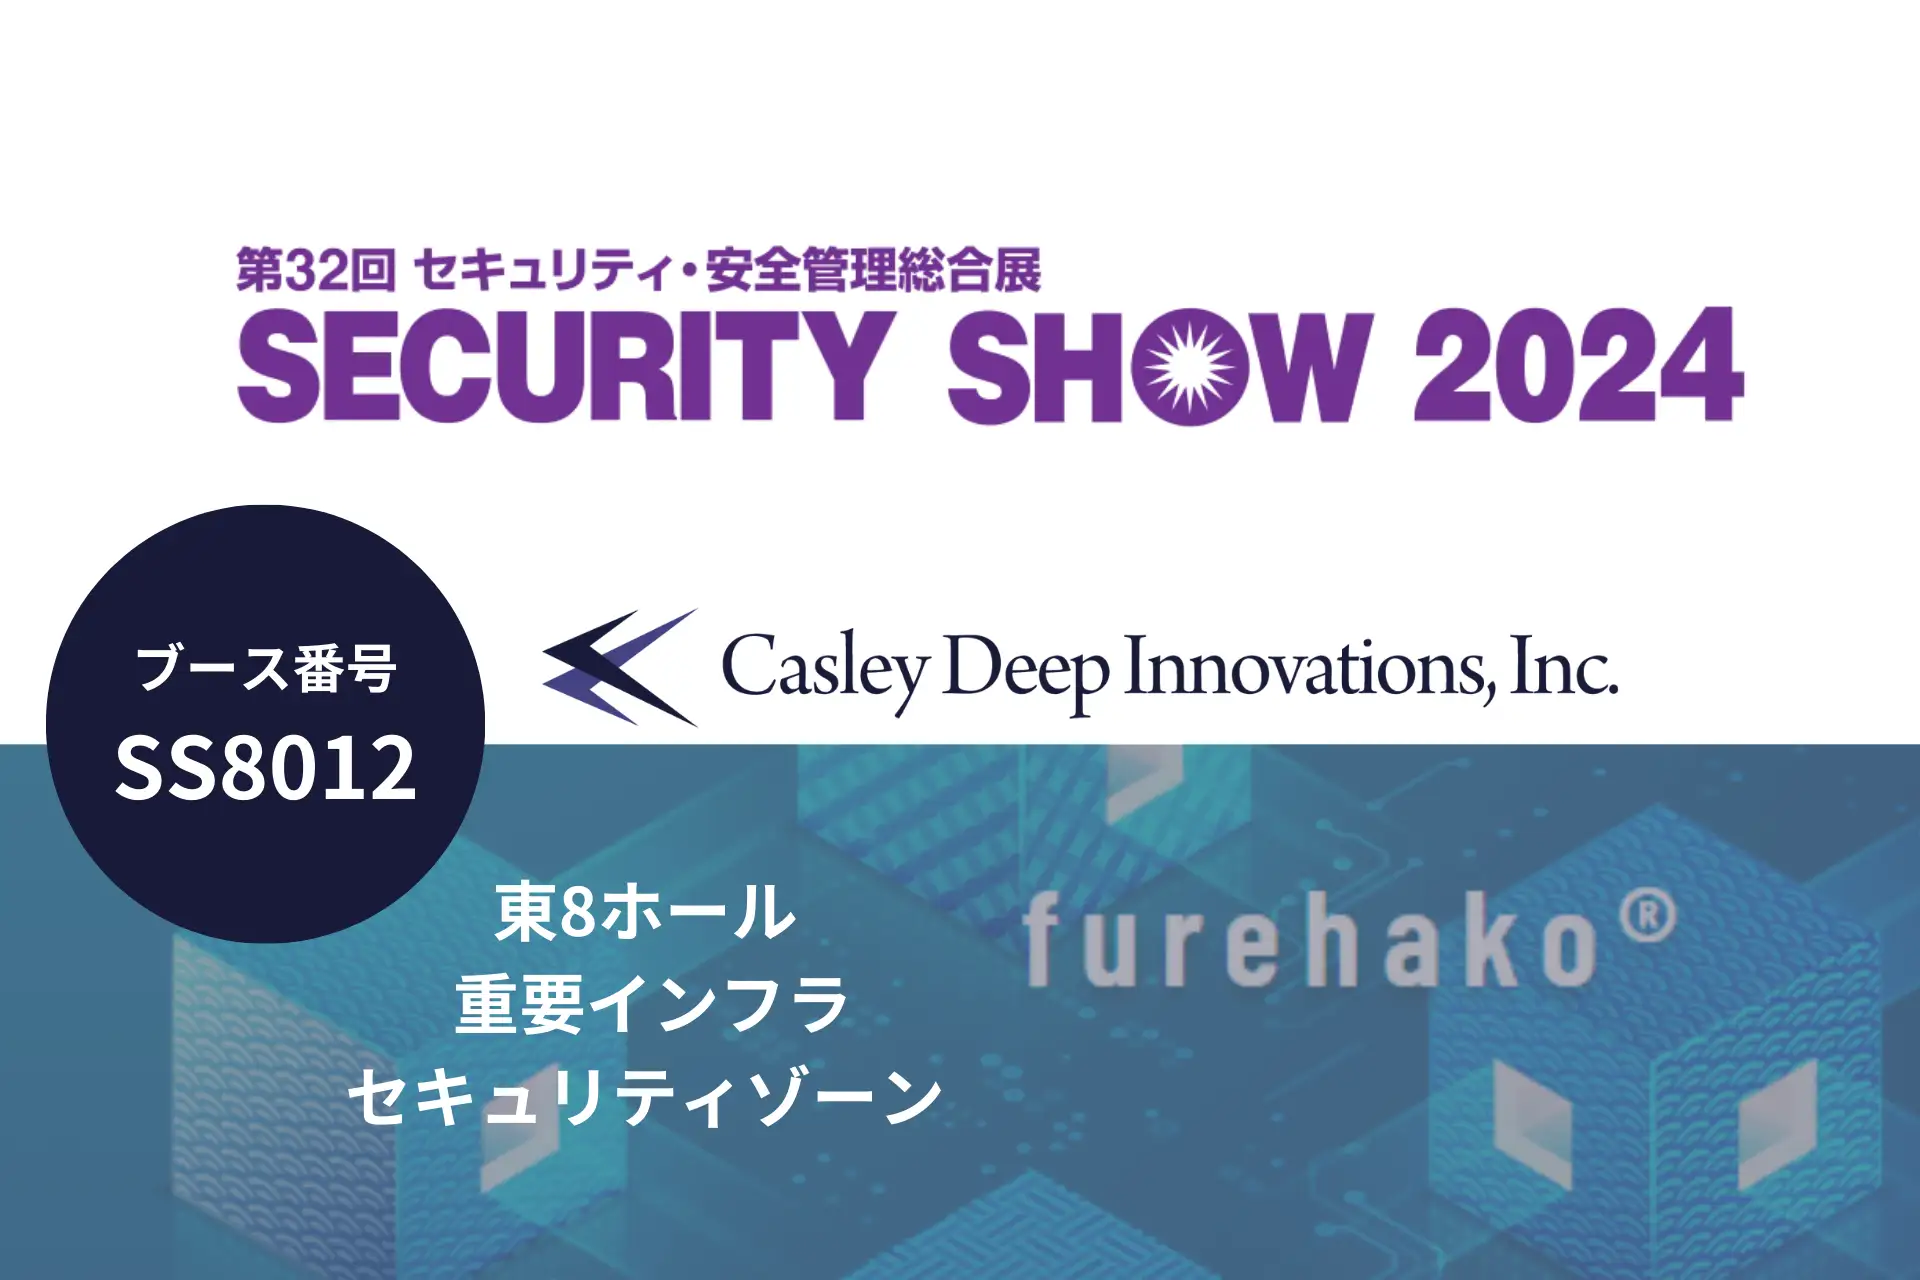 Casley Deep Innovationsが「SECURITY SHOW 2024」で展示するWeb3.0技術